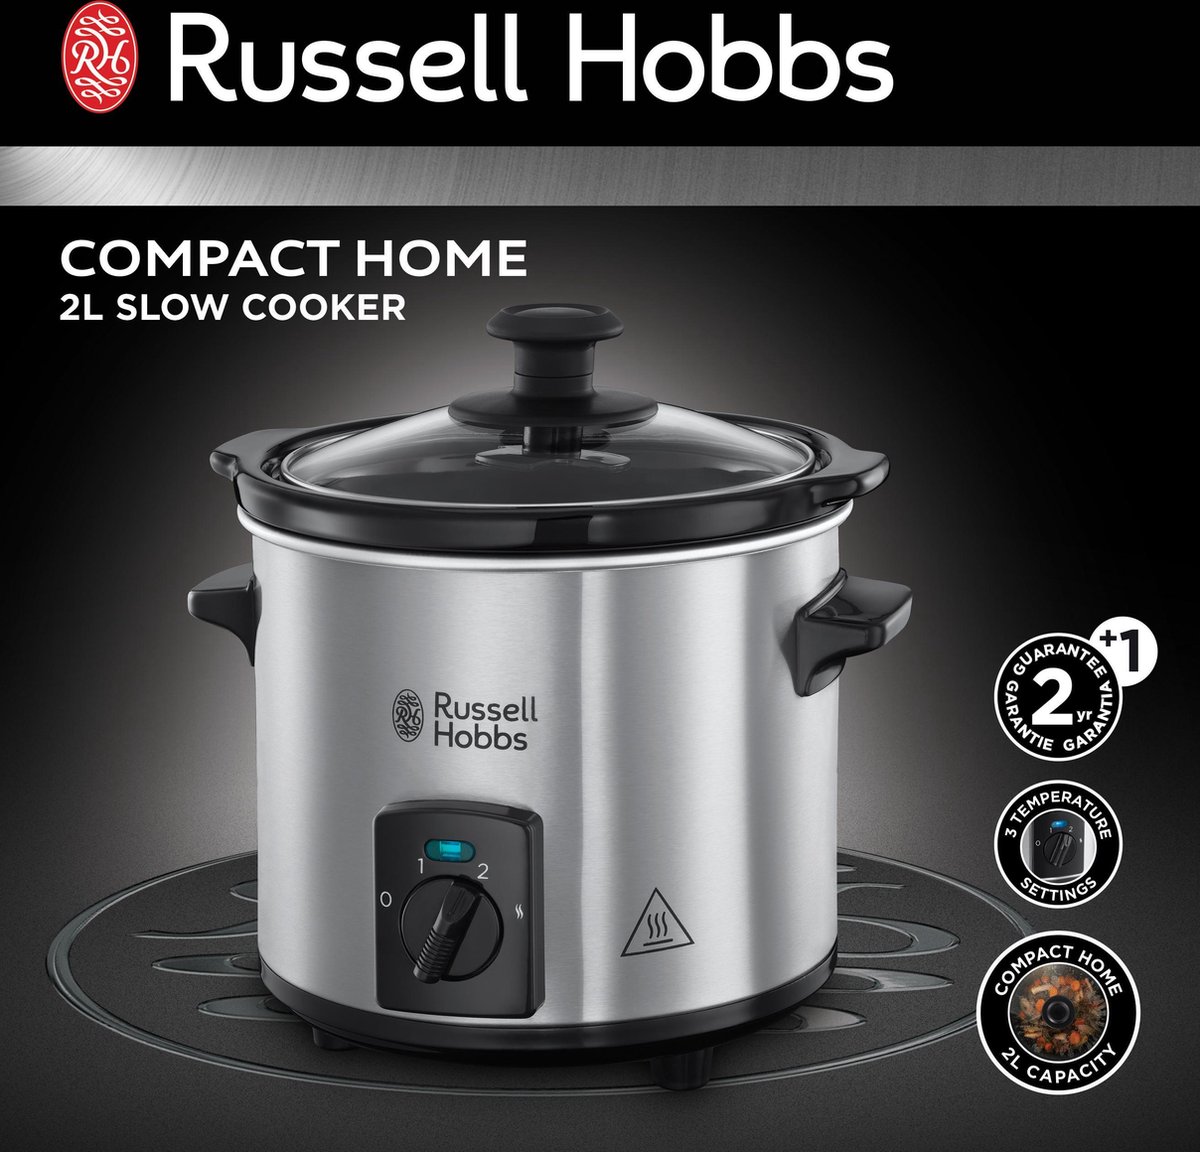 2L bol Russell Home Slowcooker Hobbs | Compact 25570-56